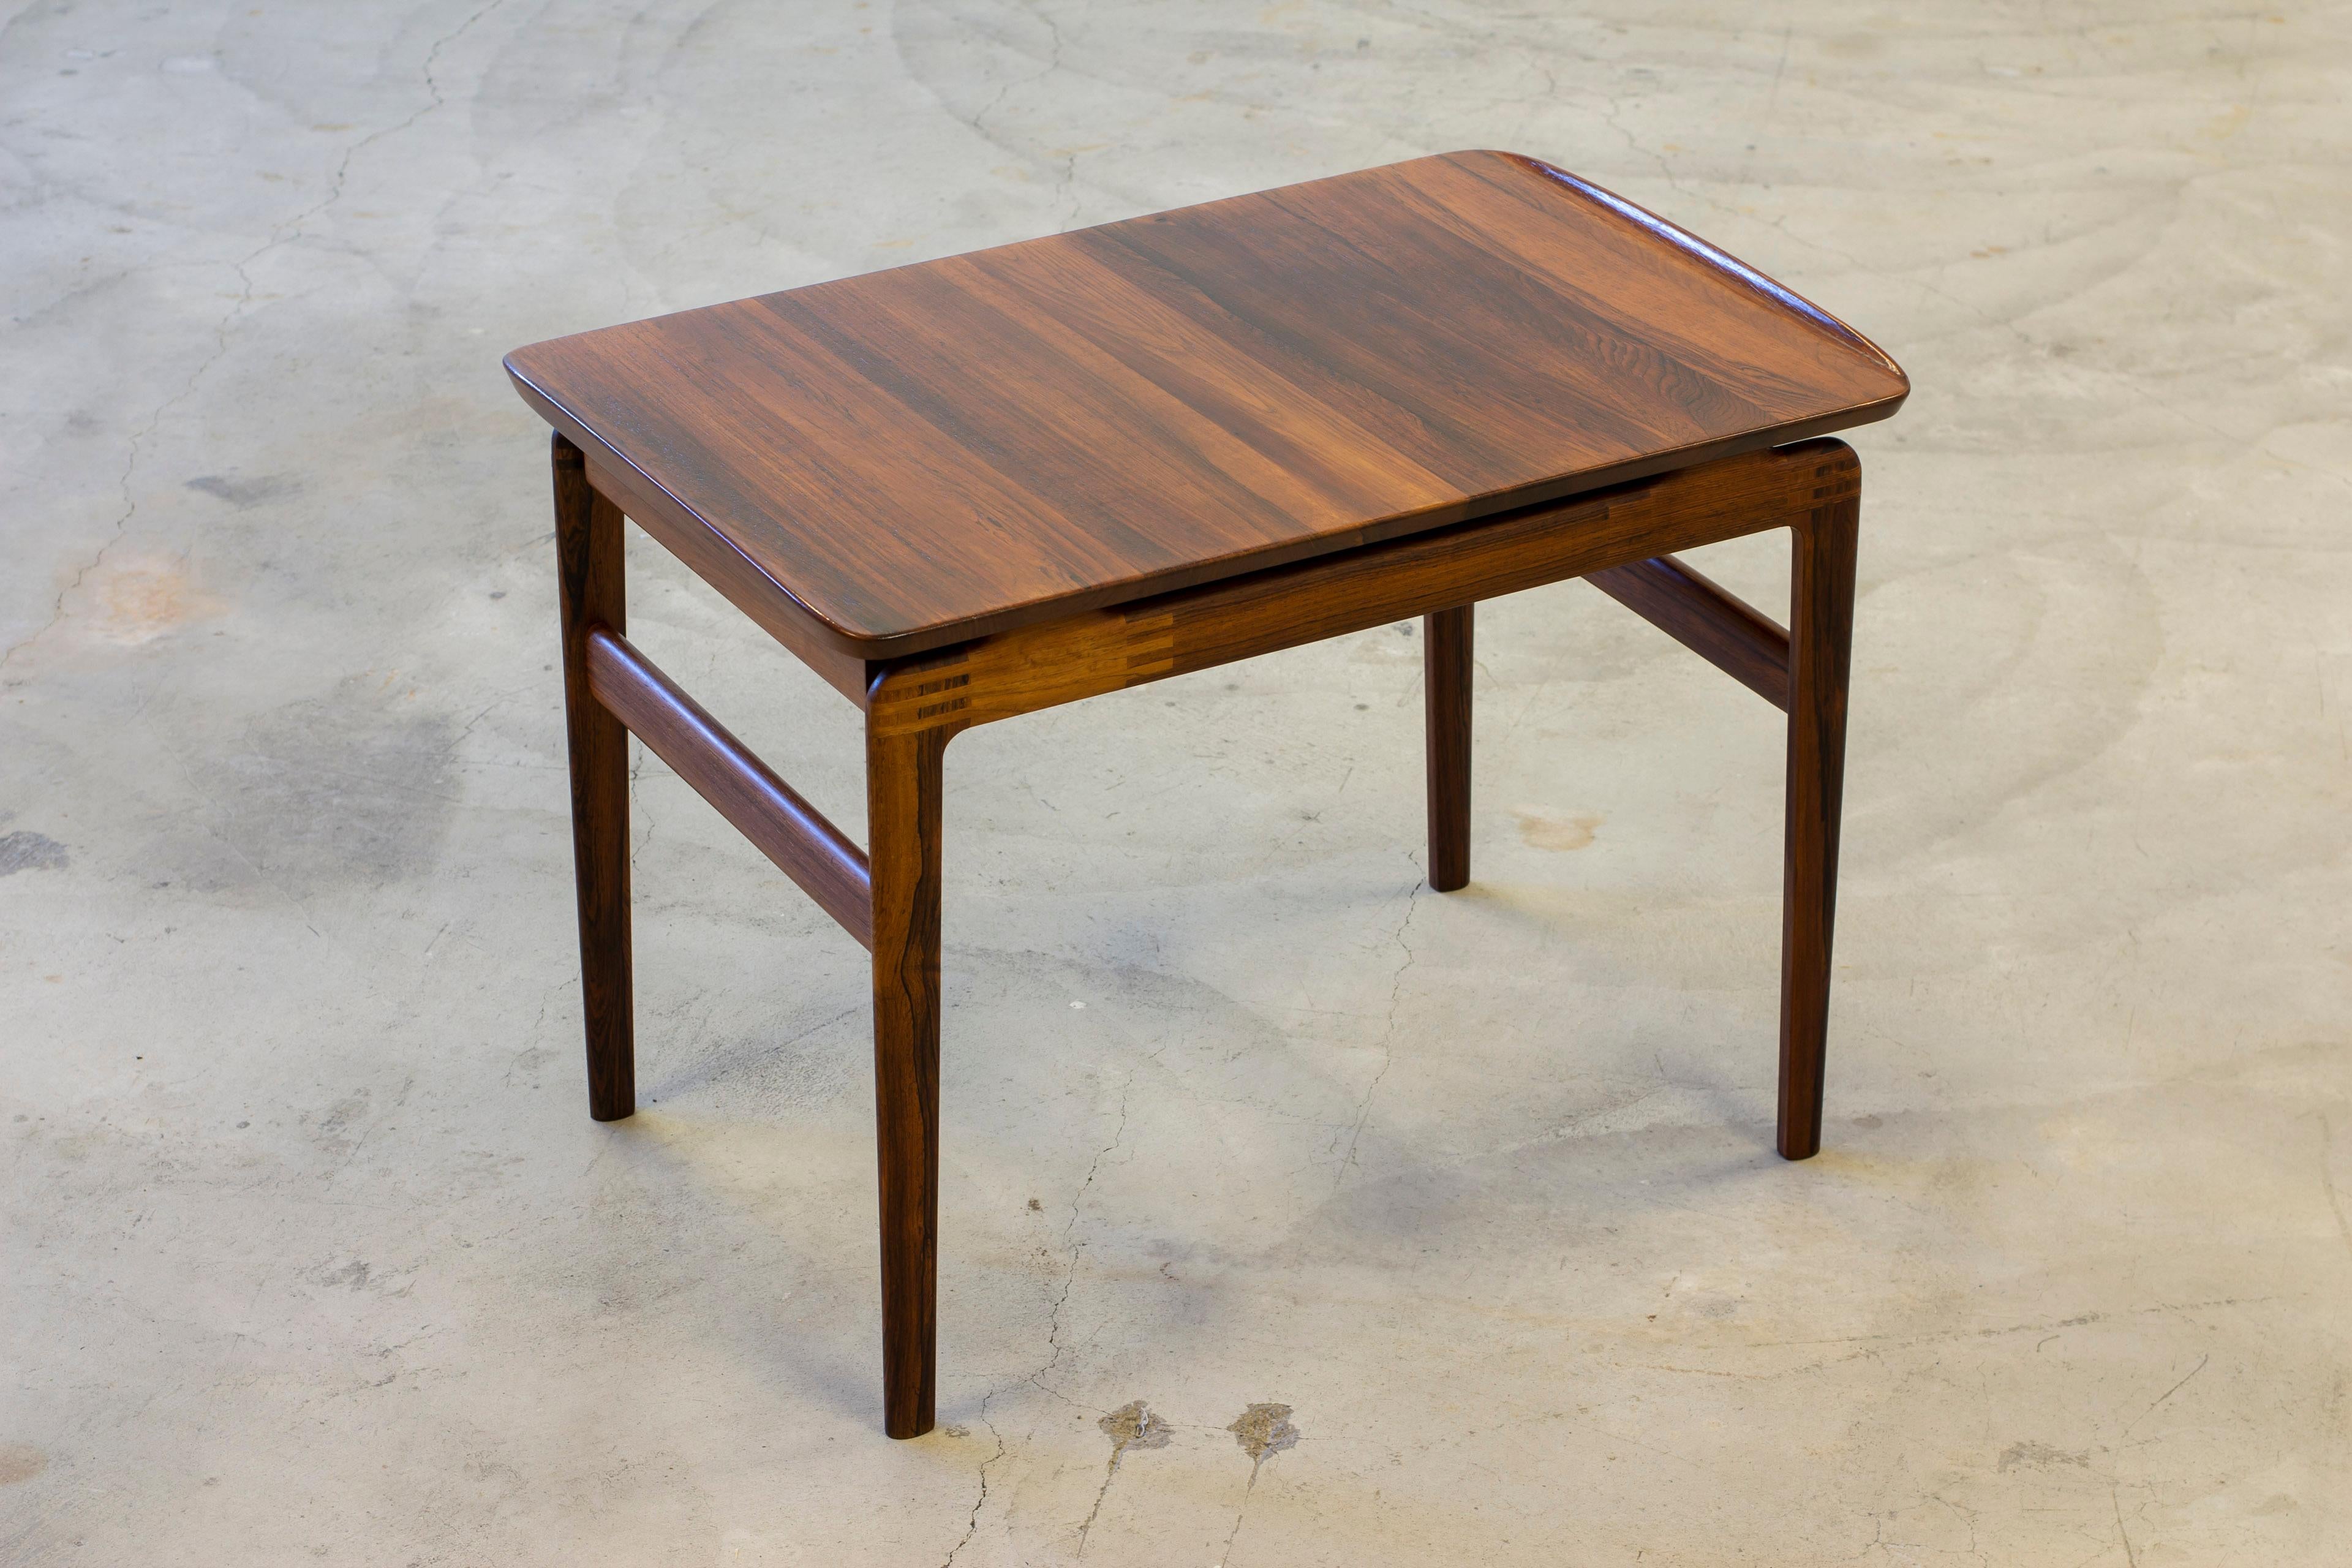 Side table designed by Peter Hvidt & Orla Mølgaard Nielsen. Produced in Denmark by France & Son during the 1960s. Made from solid Palisander with very rich grain. Sliding drawer underneath the table top. Very good vintage condition with light age